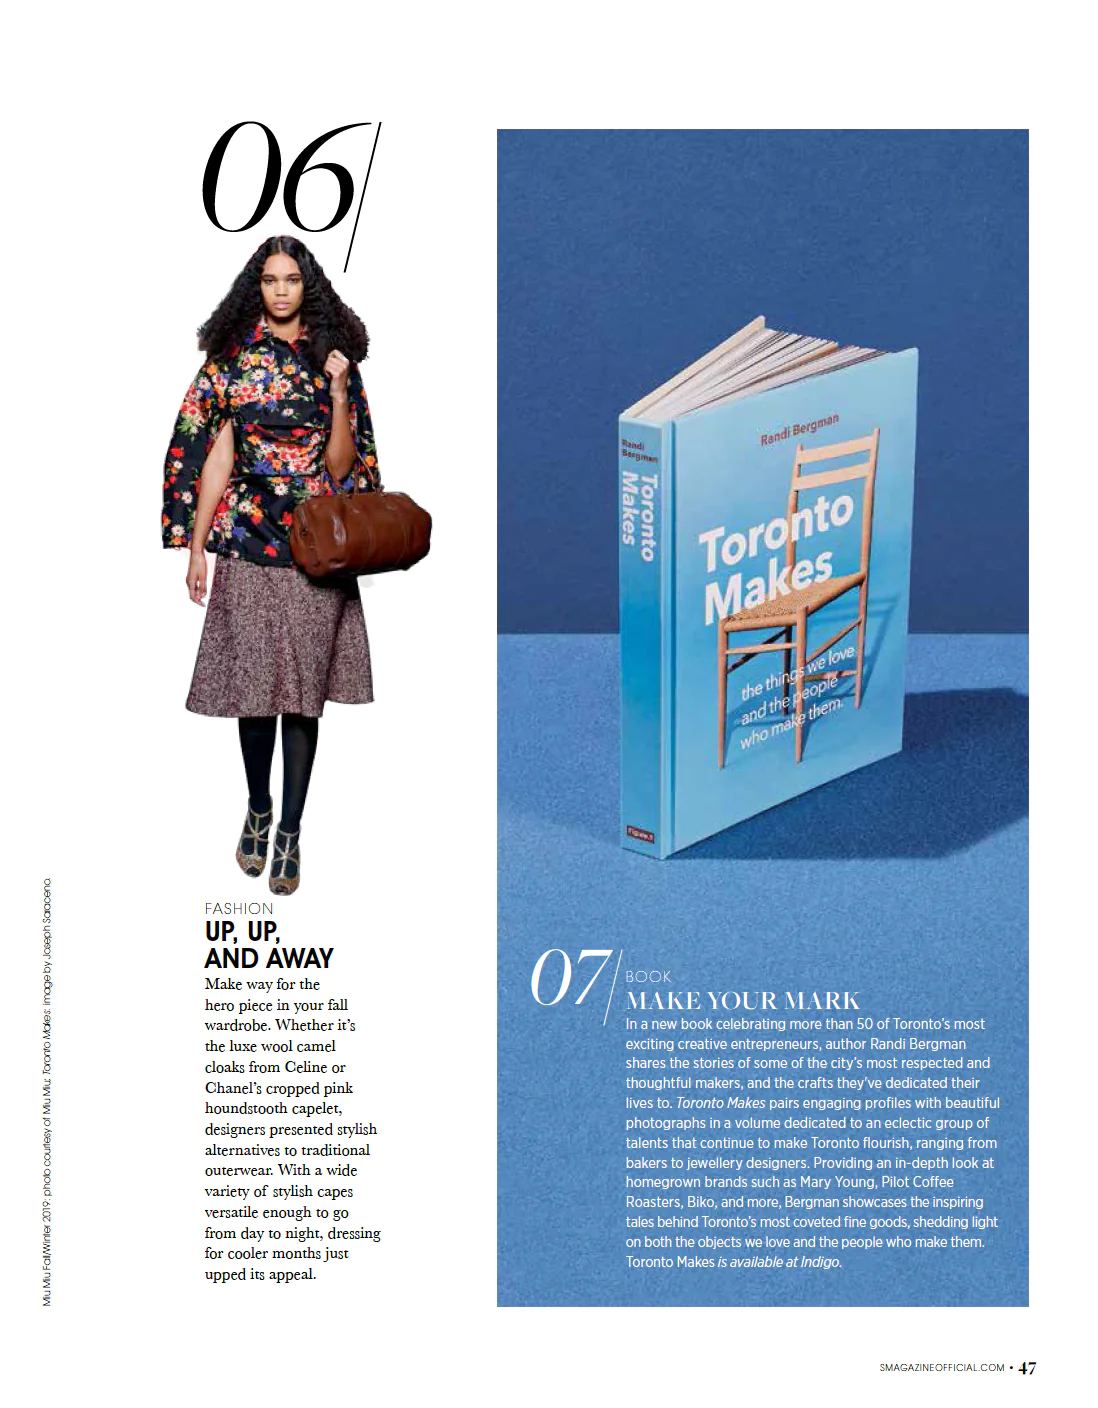  Image of the S Magazine page featuring Toronto Makes 